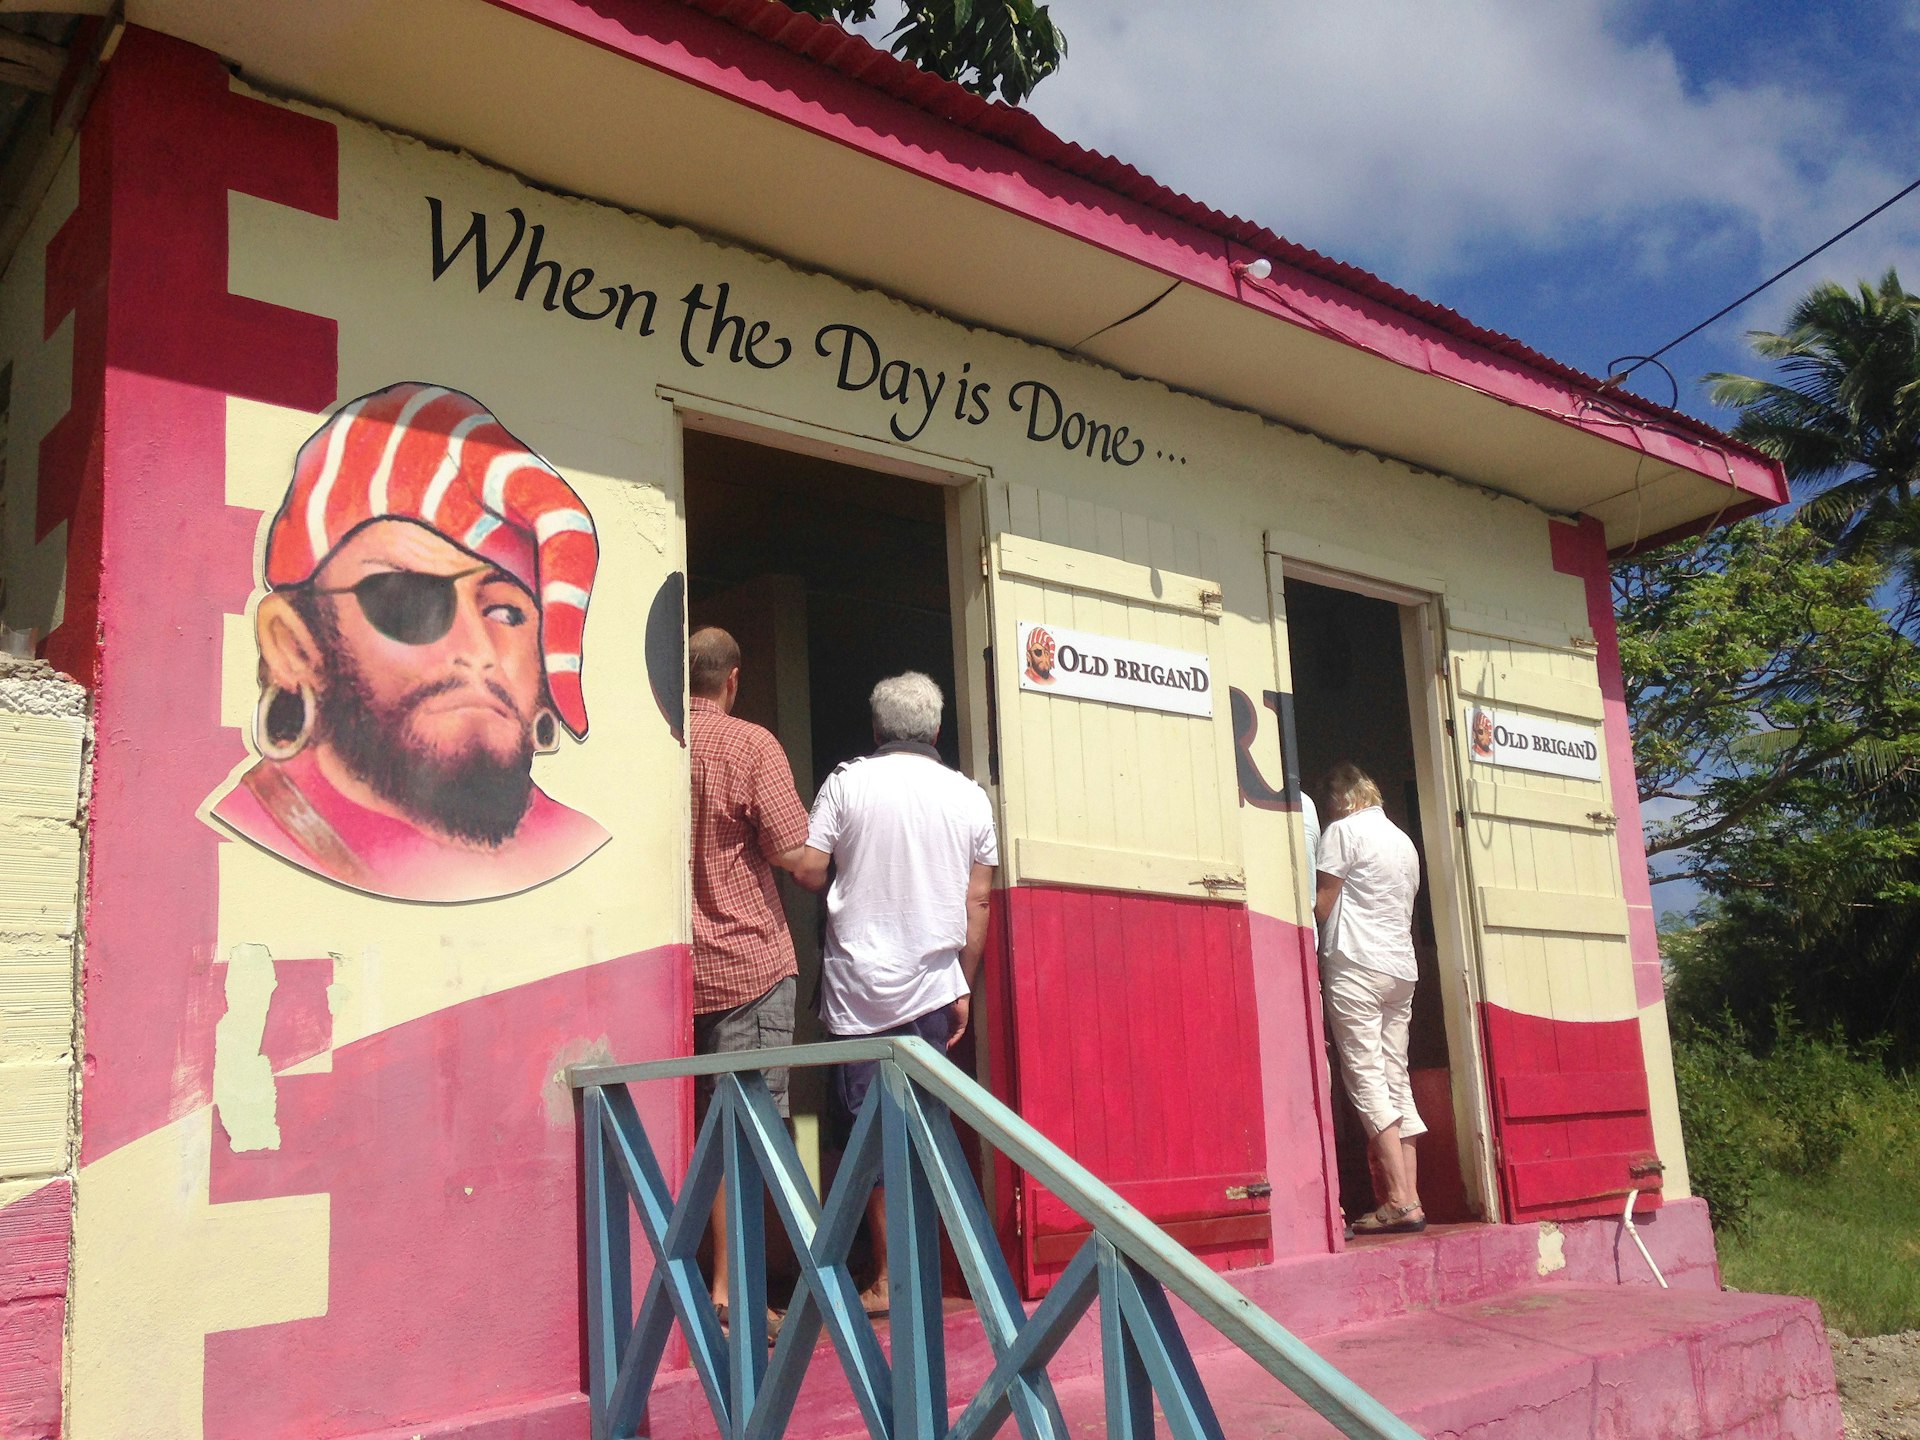 Barbadian rum shop run by the aunt champion UK boxer Nigel Benn. Image by Sarah Reid / Lonely Planet